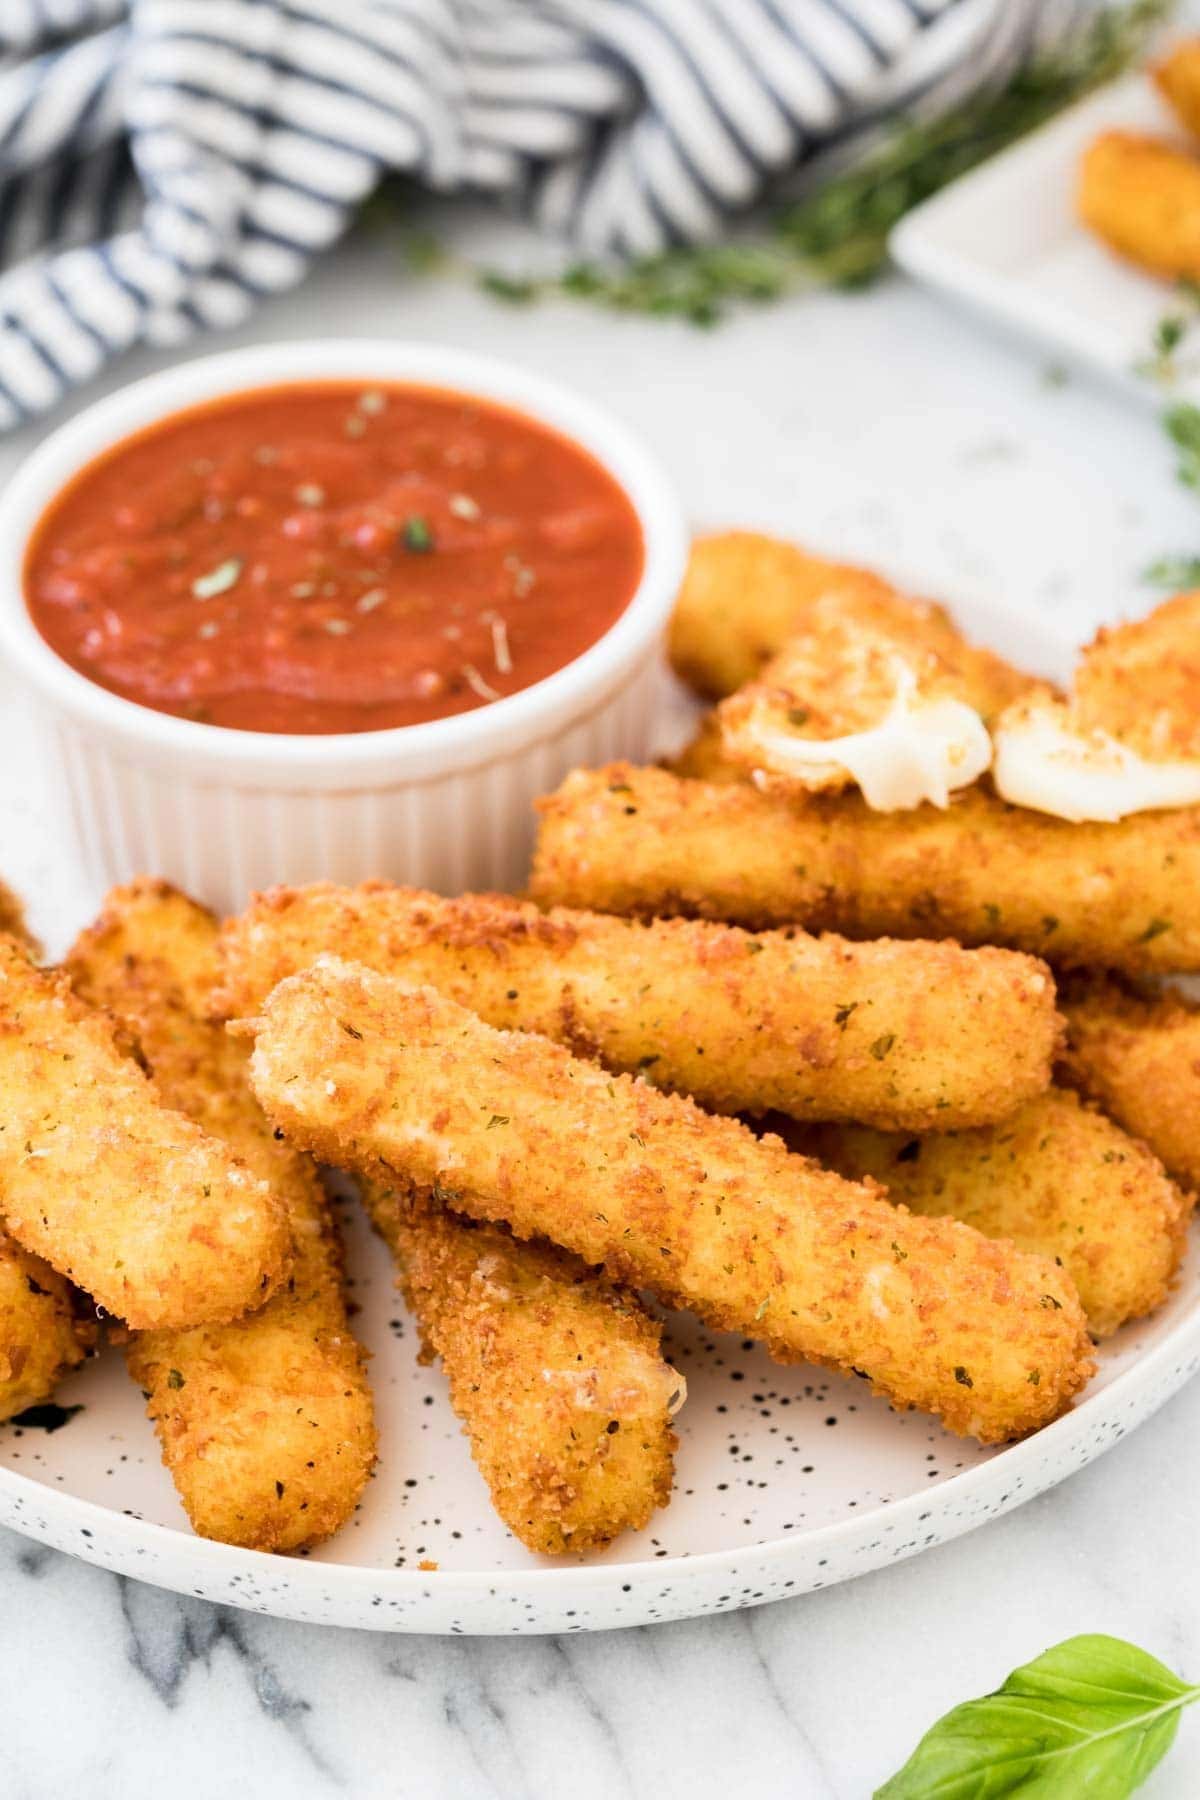 A platter of breaded mozzarella sticks served with a dipping sauce.